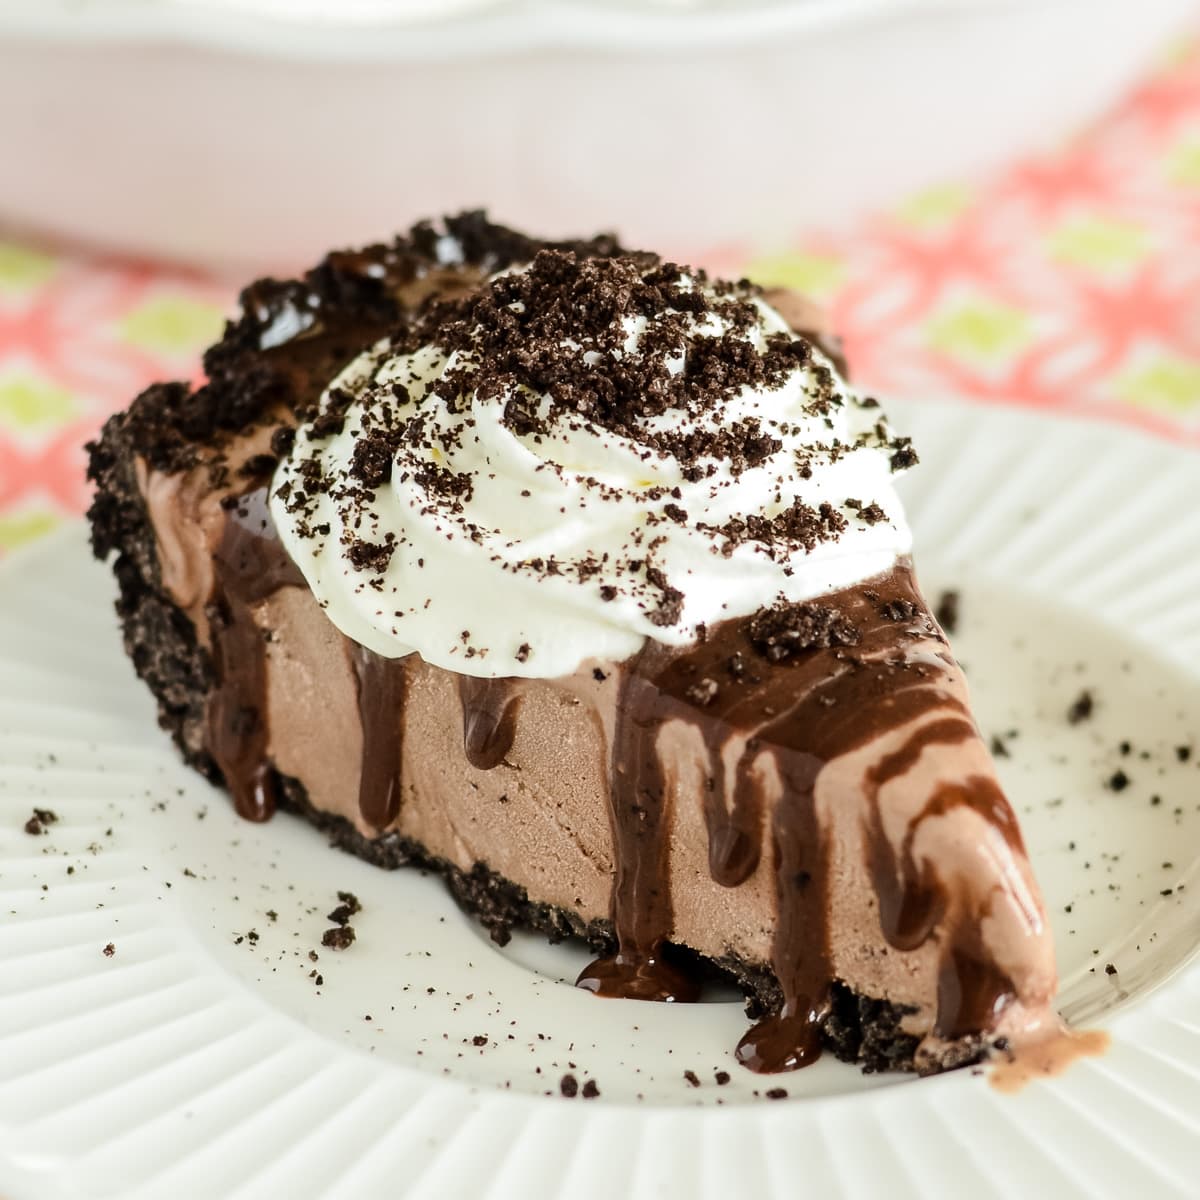 Mud pie recipe sliced and served on a white plate with wipped cream.